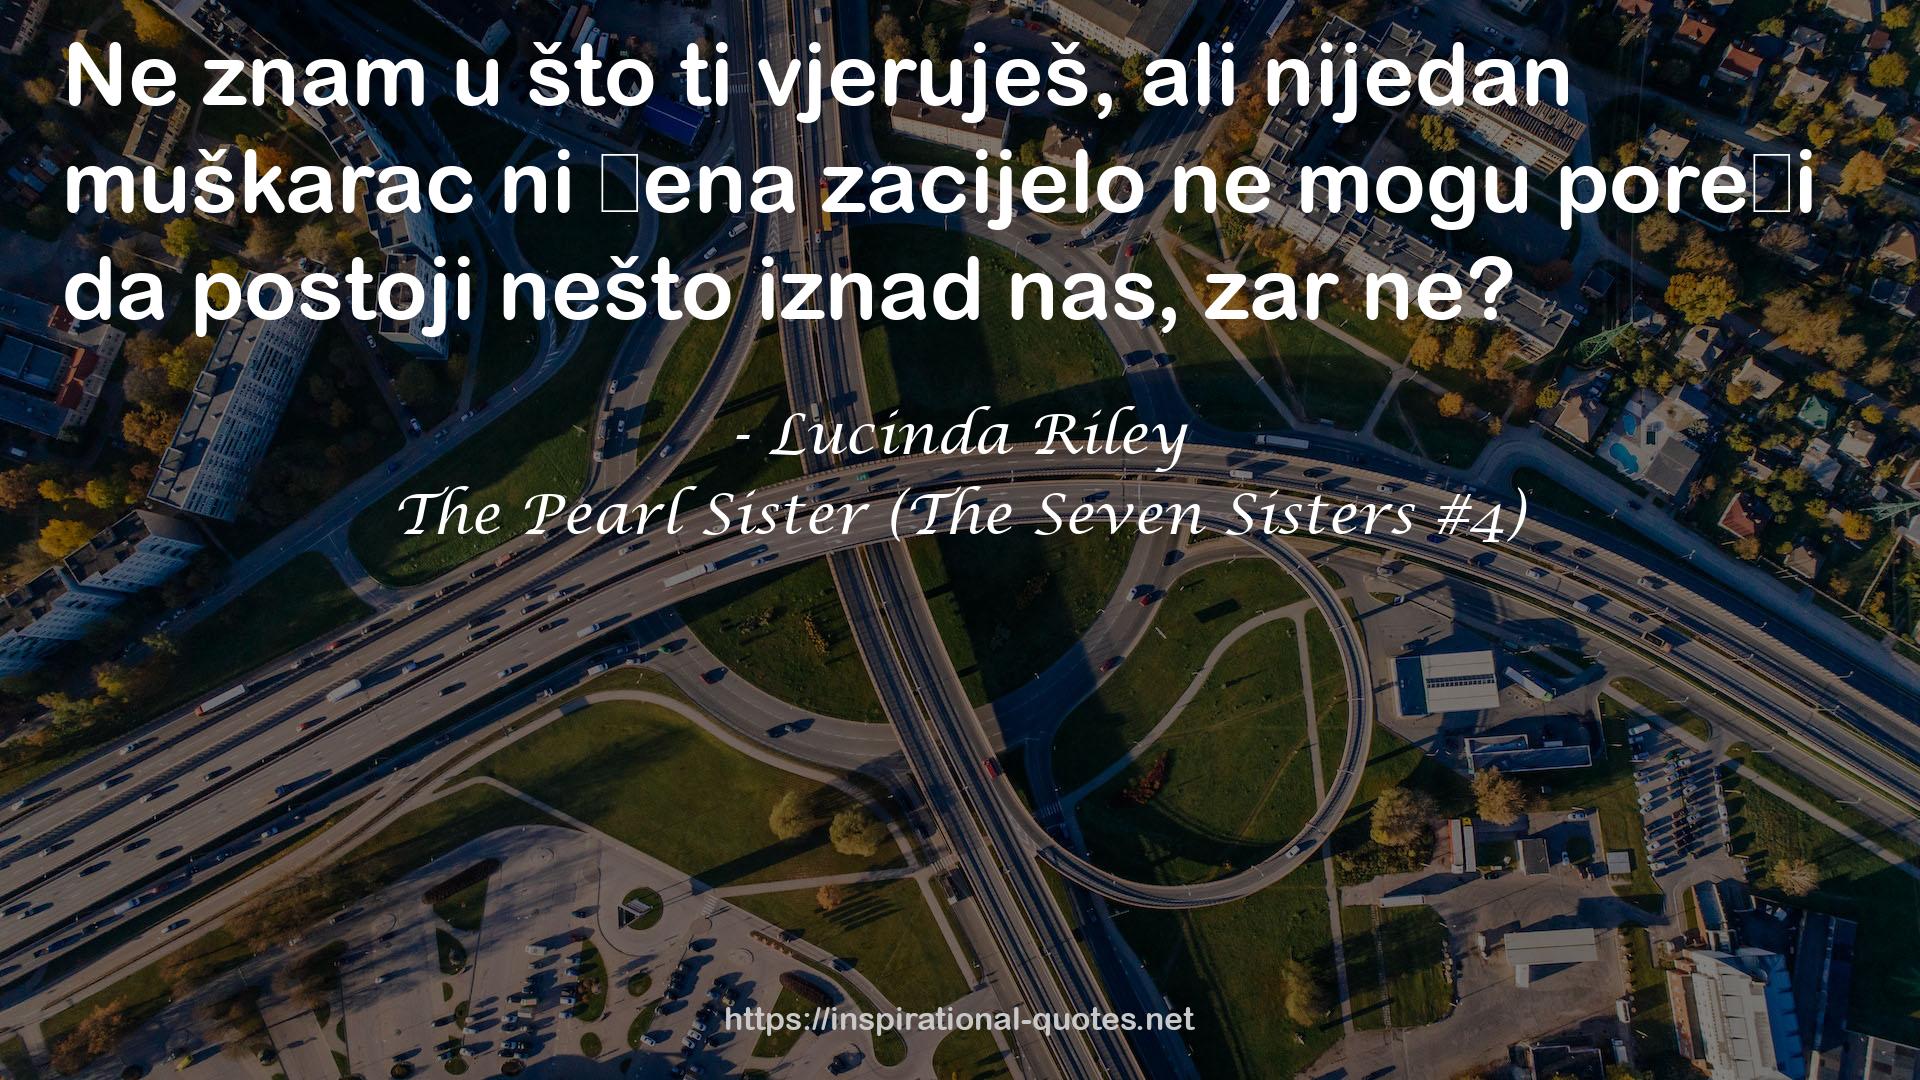 The Pearl Sister (The Seven Sisters #4) QUOTES